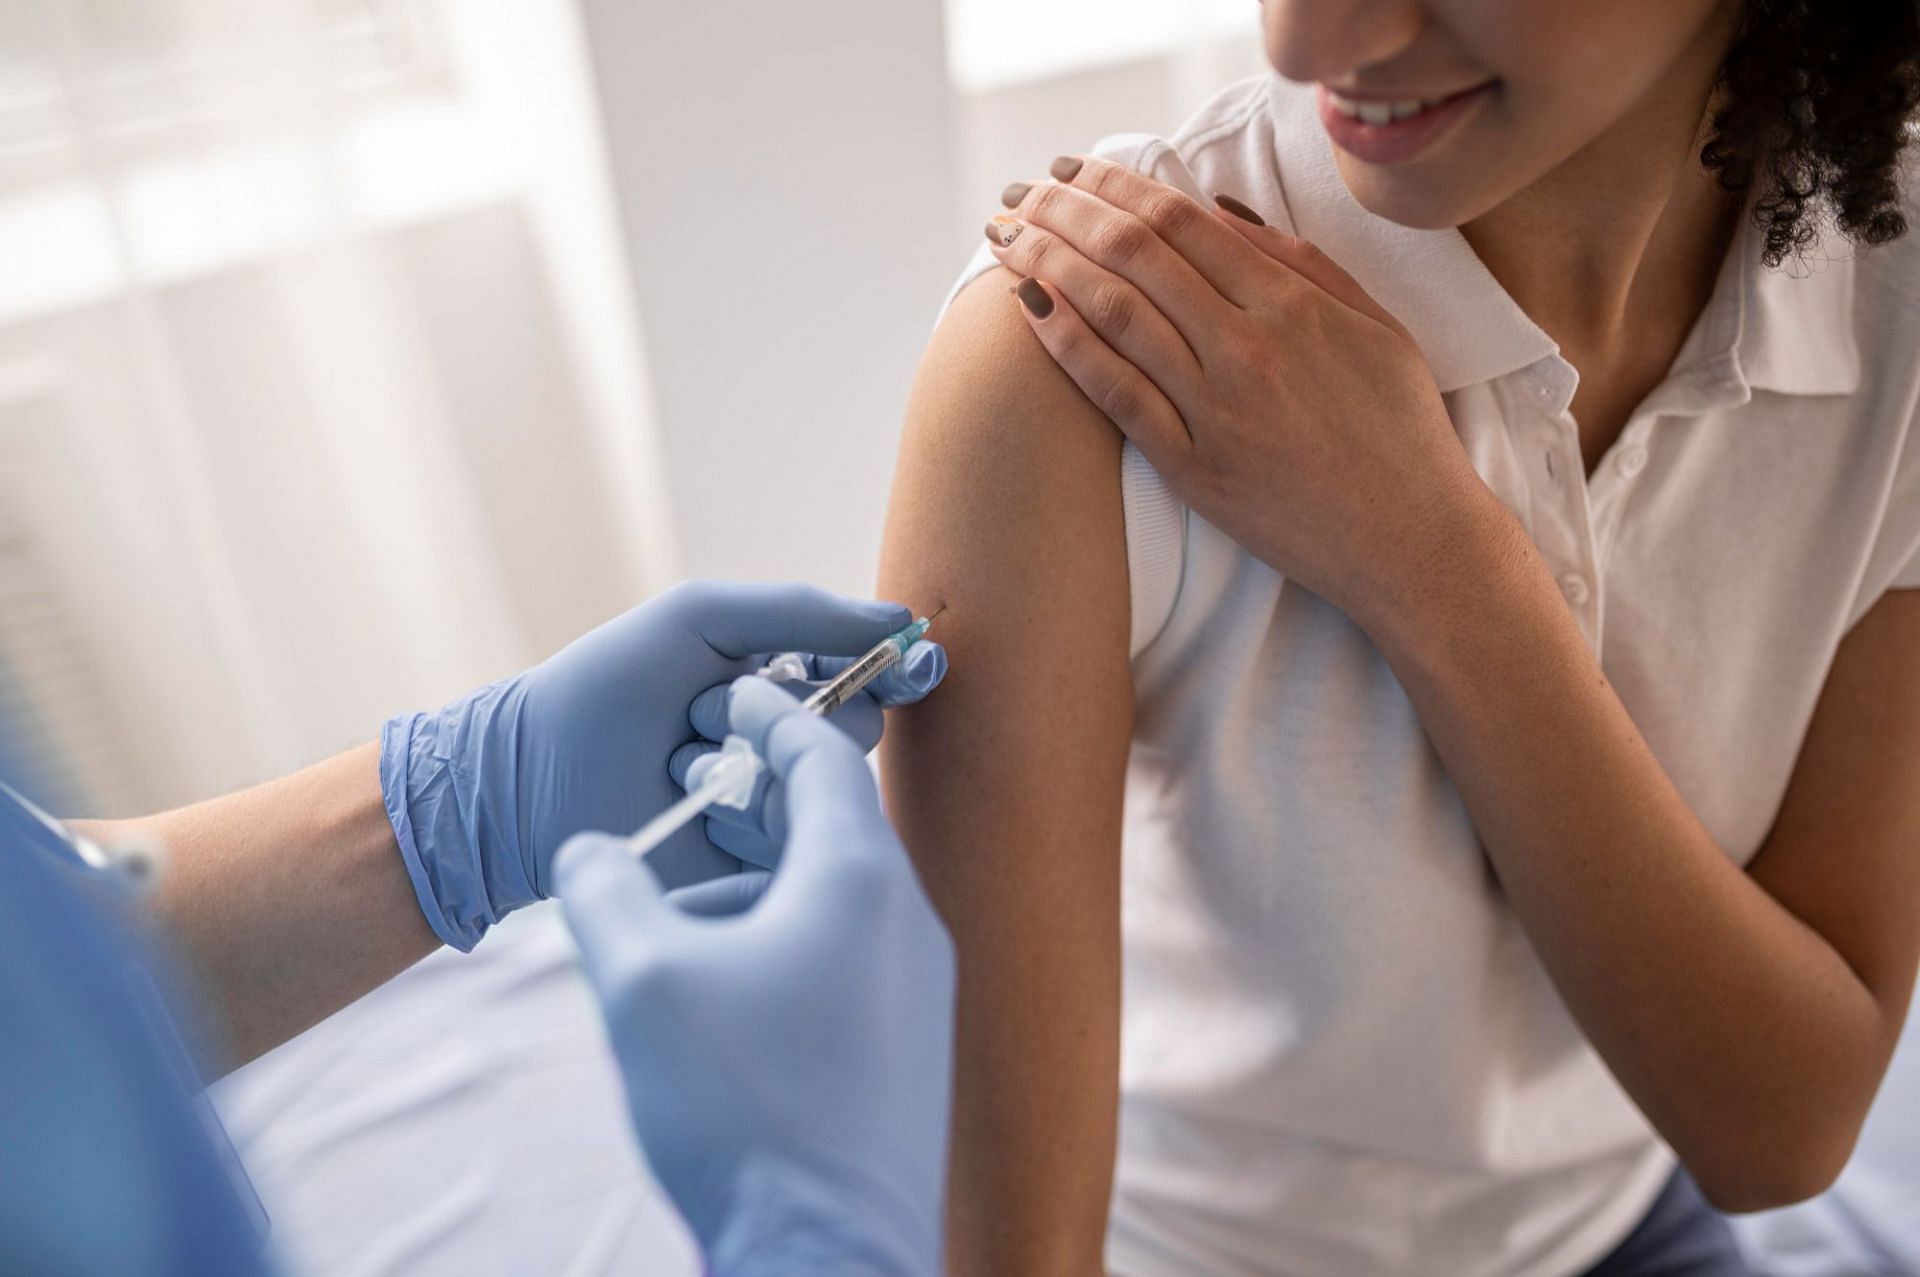 Get vaccinated instead of getting treatment (Image by freepik)